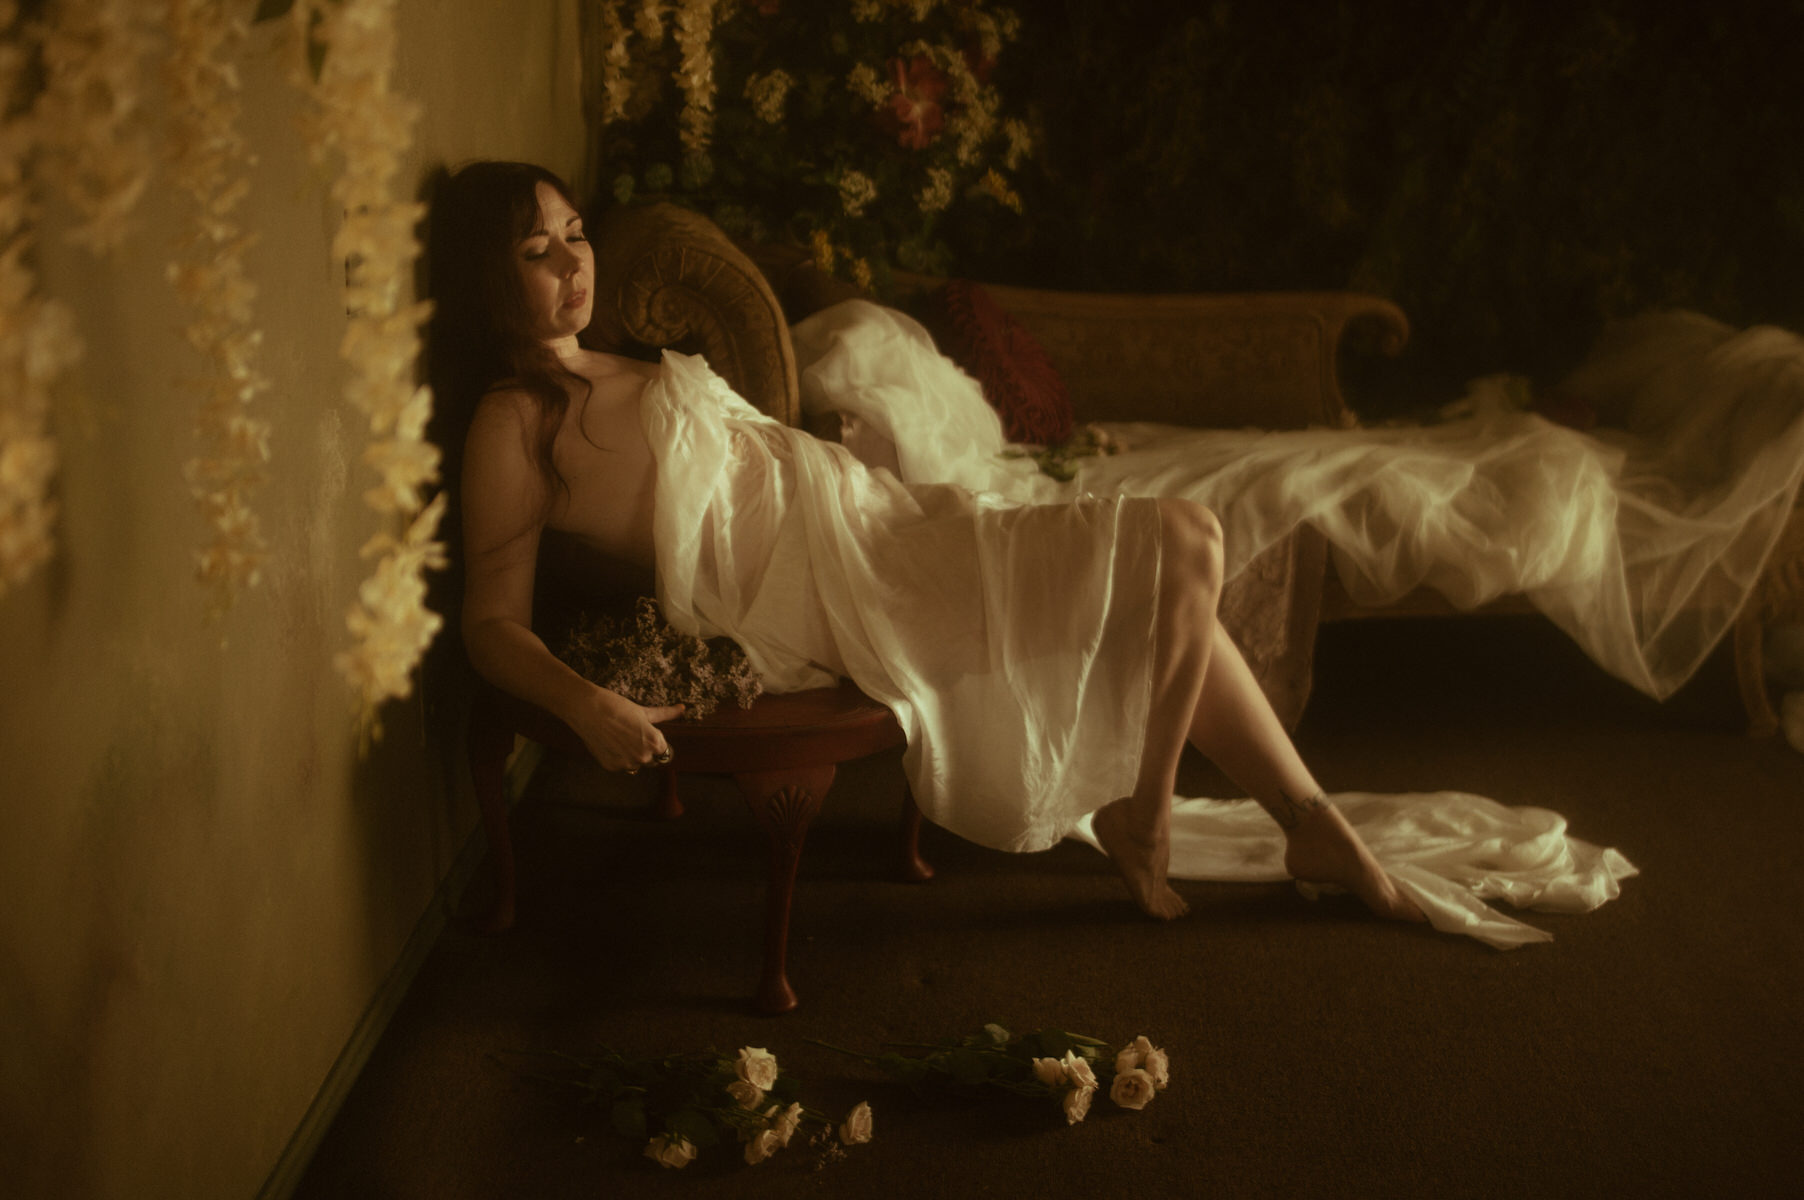 A woman covered by white fabric, posing artistically on a chair, capturing the essence of Texas boudoir.